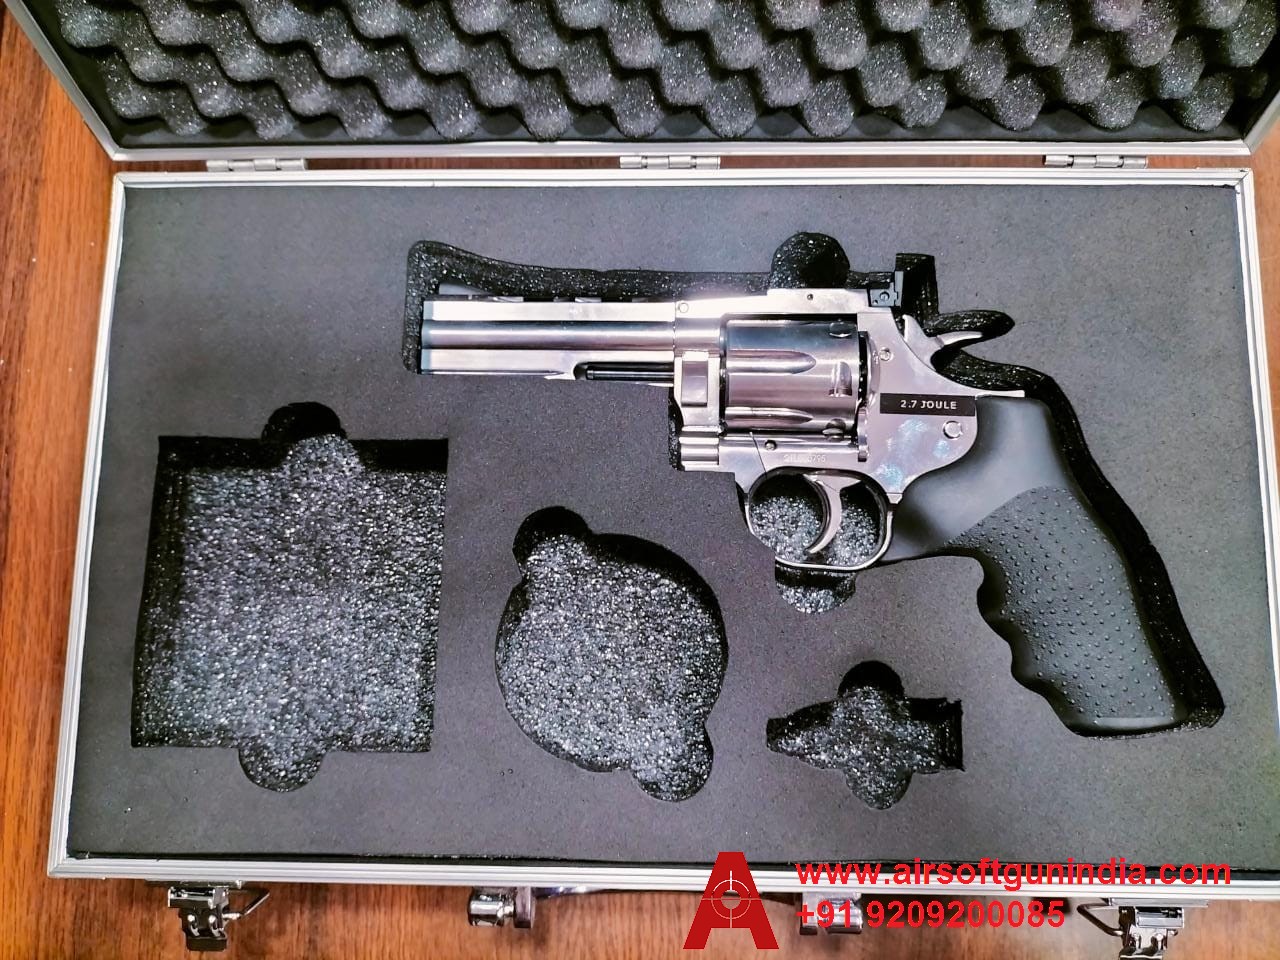 Customized Gun Case For Dan Wesson 715 4 Inch Co2 Pellet Revolver By Airsoft Gun India